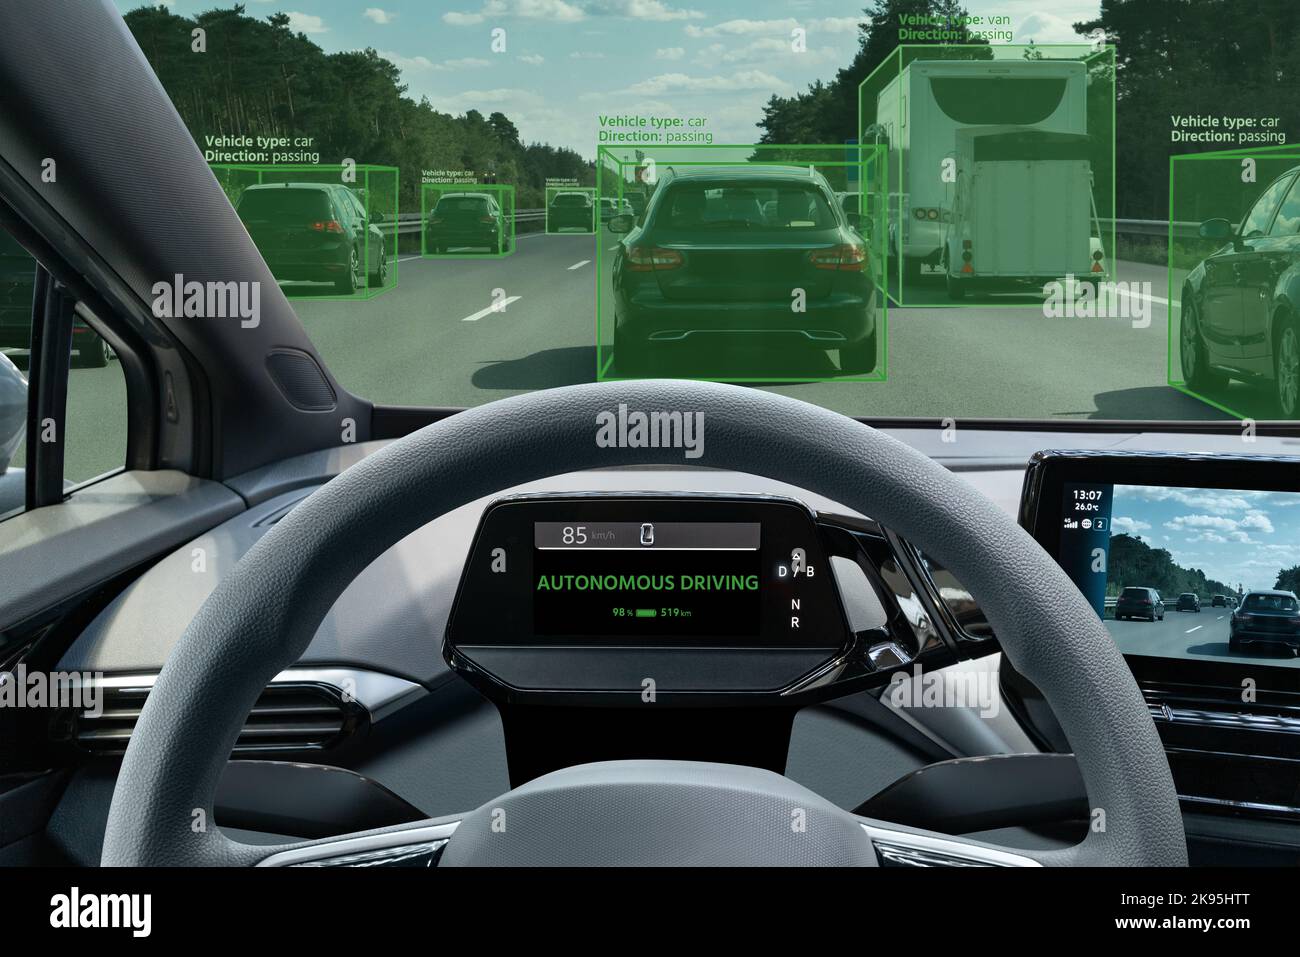 Autonomous vehicle vision with system recognition of cars  Stock Photo